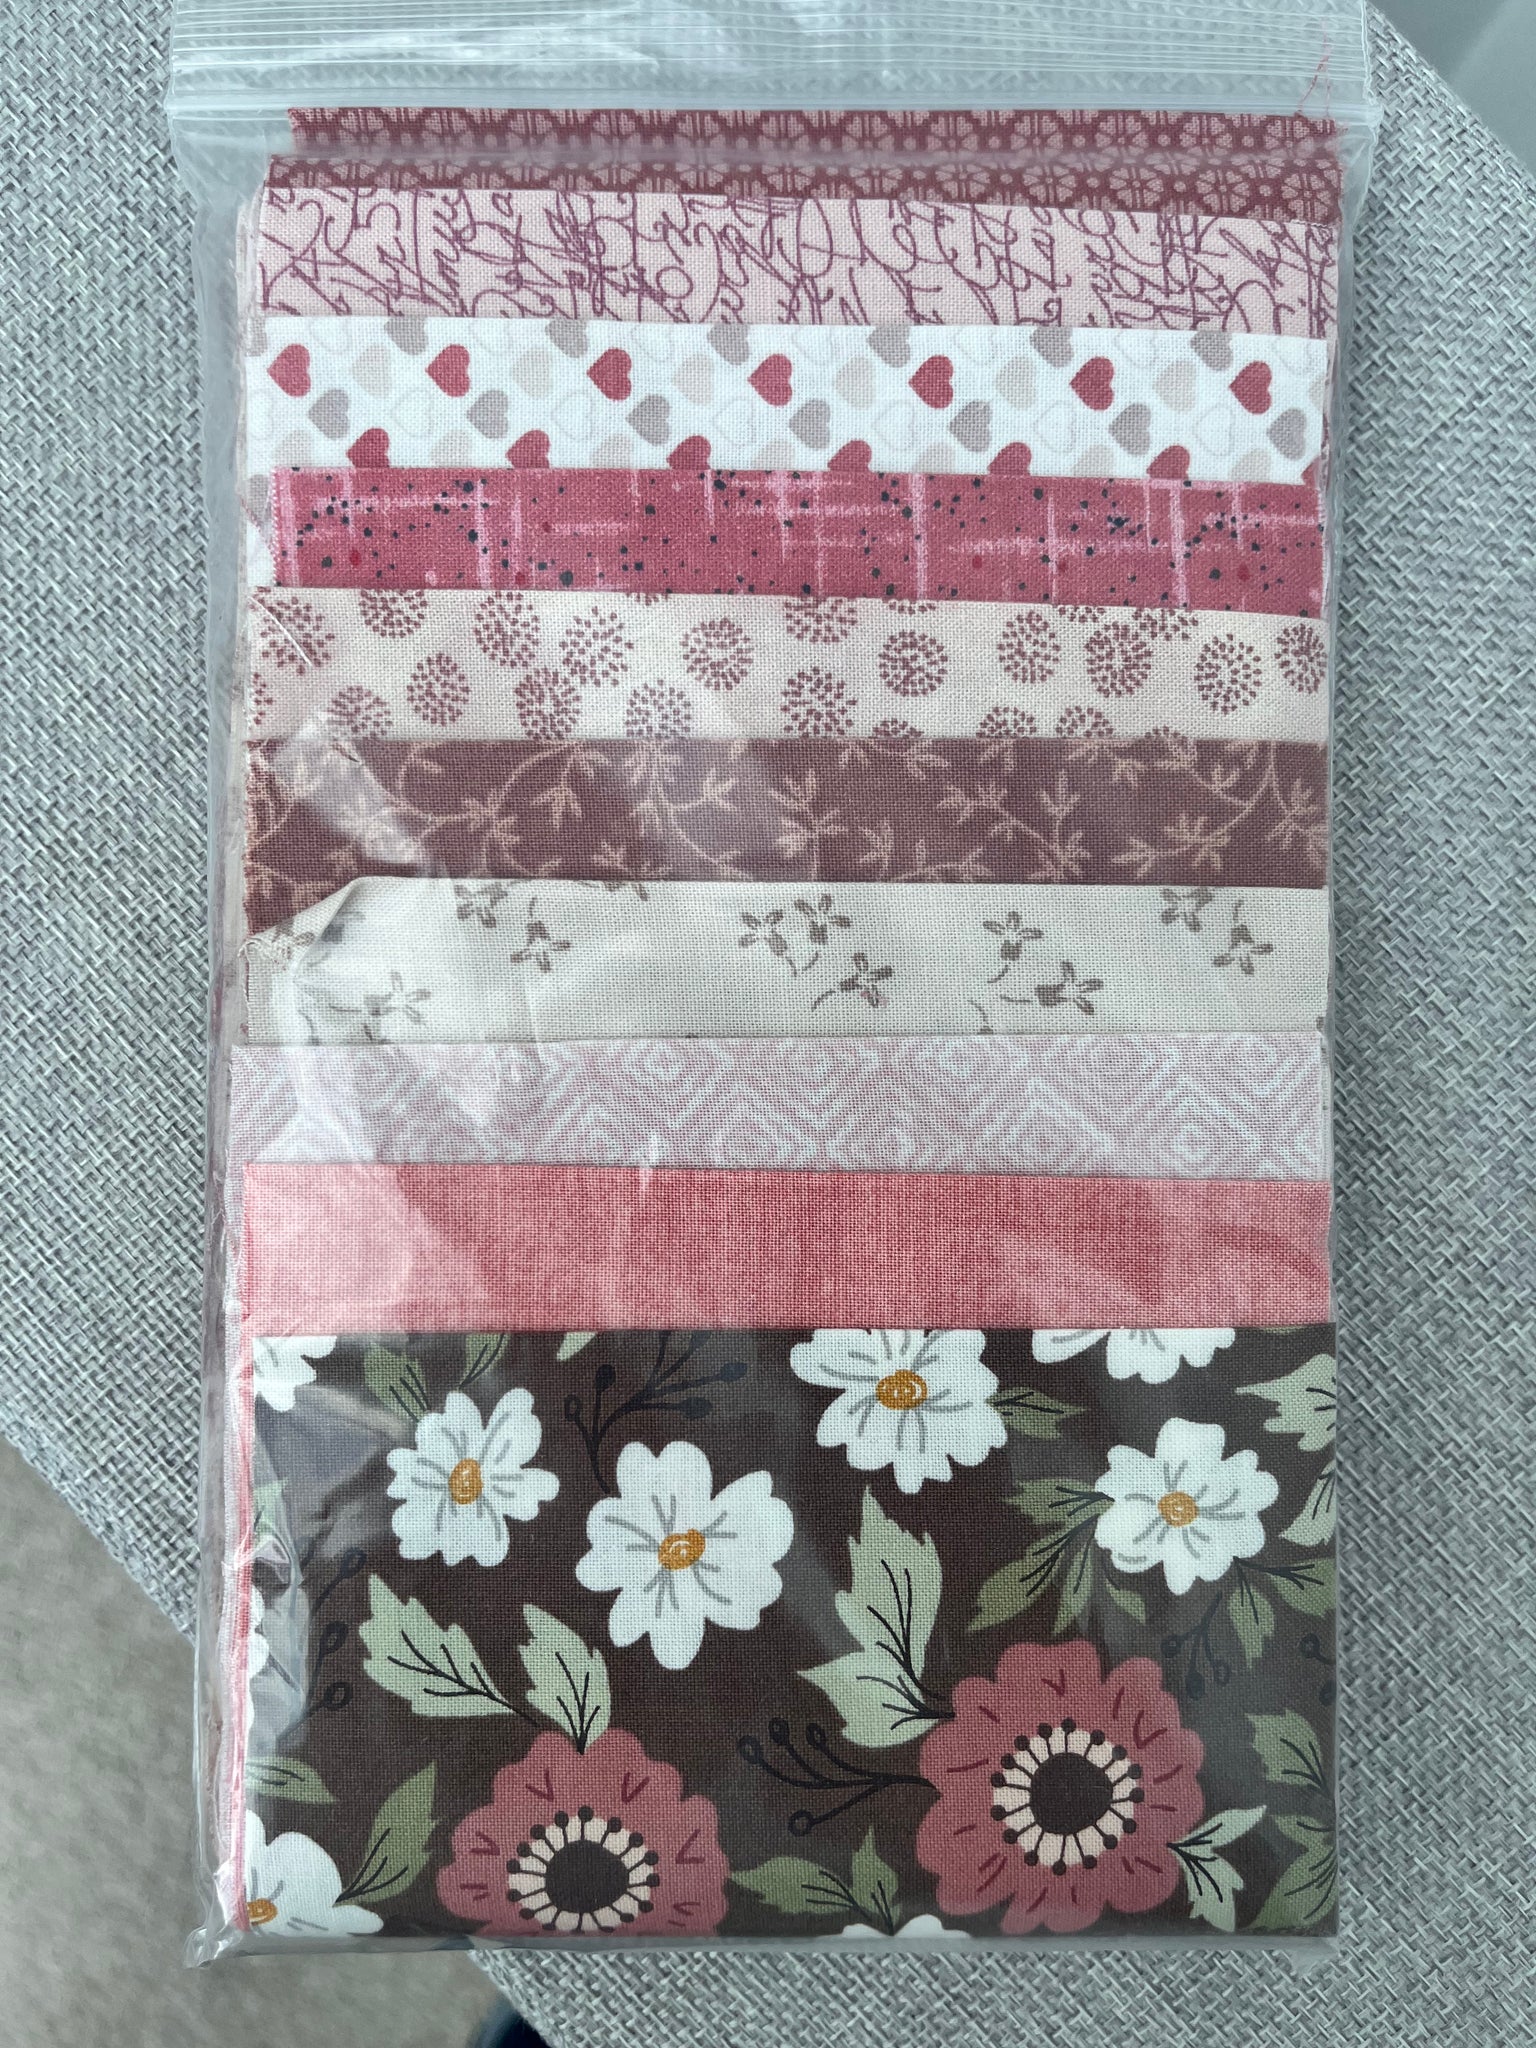 Dusky Pink - 5" strip packs  - 5" x 42" - 10 5" strips - 1 1/4 mtrs of fabric